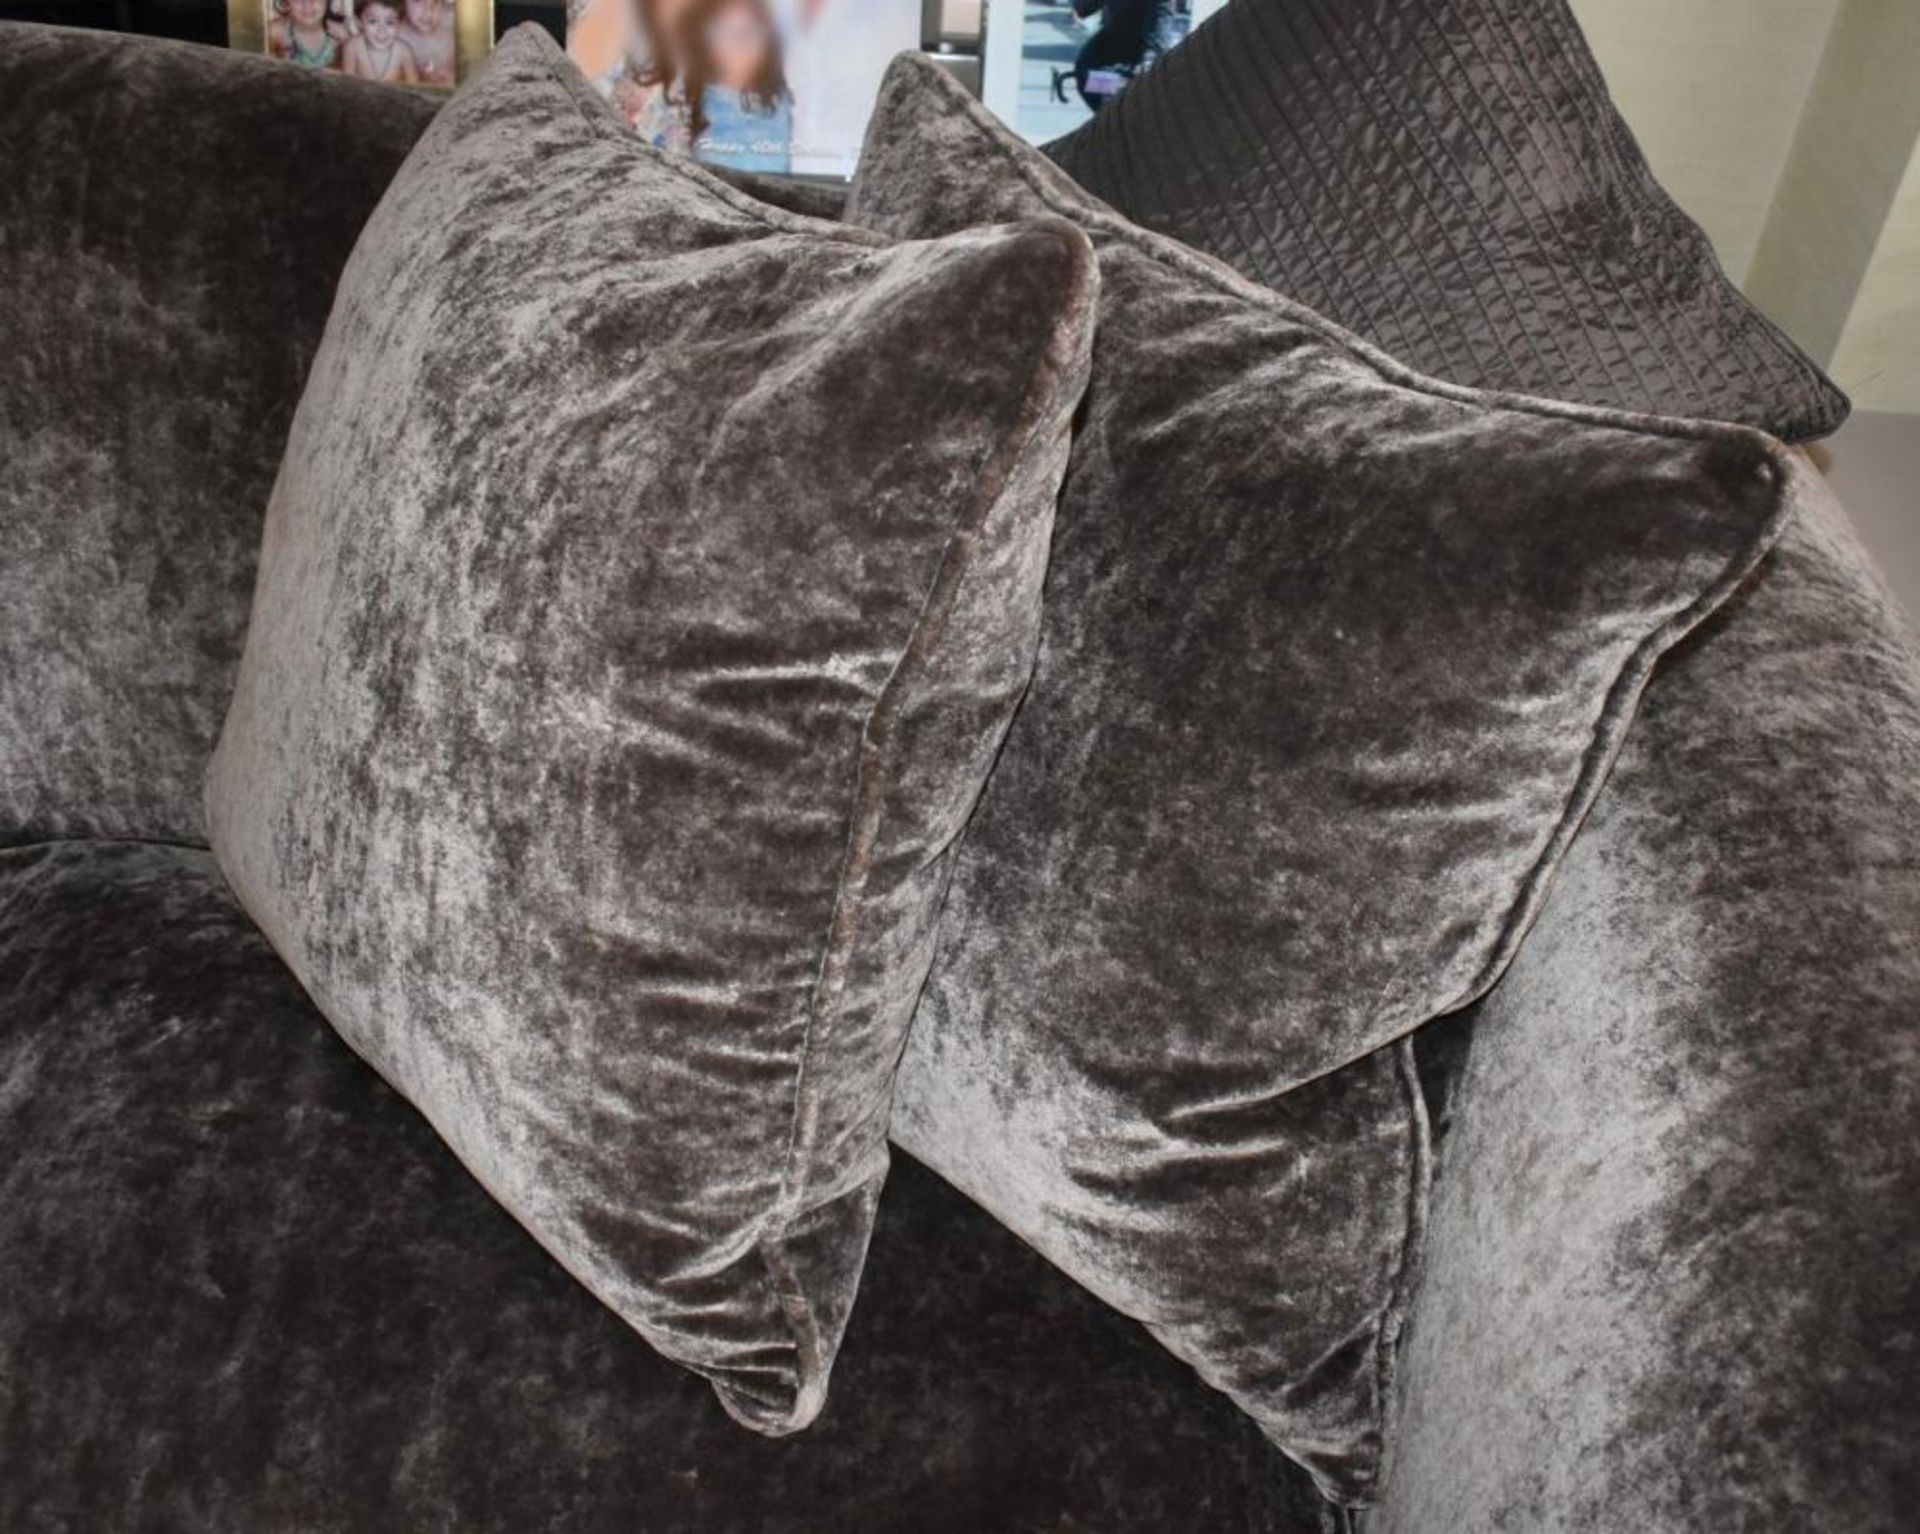 1 x Large Well Upholstered Sofa In A Rich Brown Chenille With Studded Detailing - Includes Cushions - Image 3 of 9